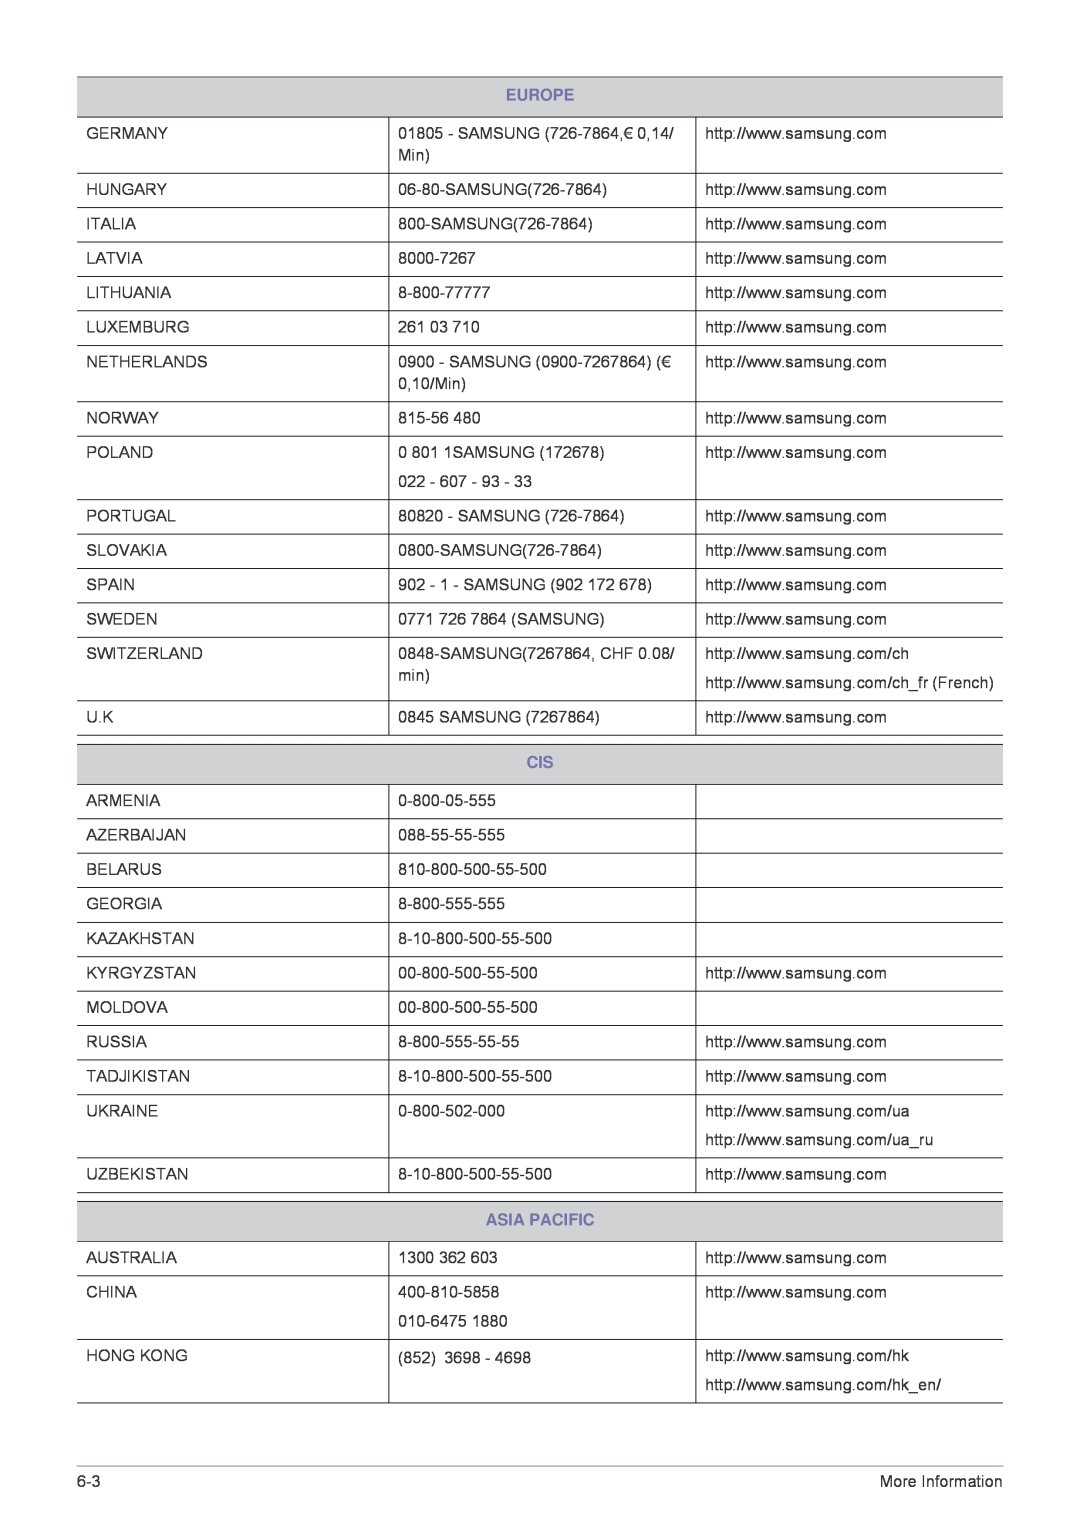 Samsung MD230X3, MD230X6 user manual Europe, Asia Pacific 